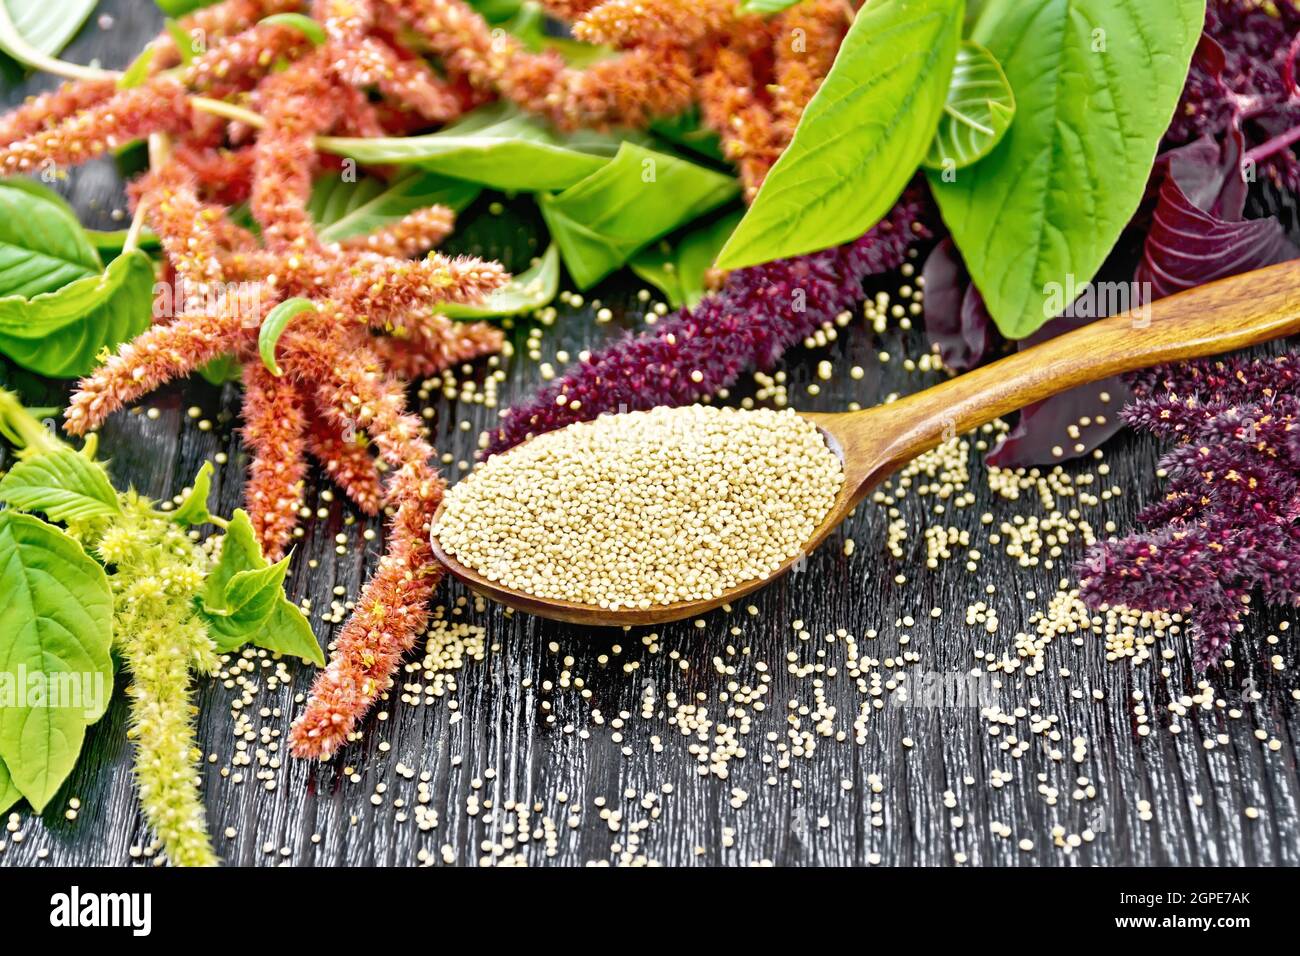 Amaranth groats in a spoon, red, burgundy and green inflorescences with leaves on a wooden board background Stock Photo